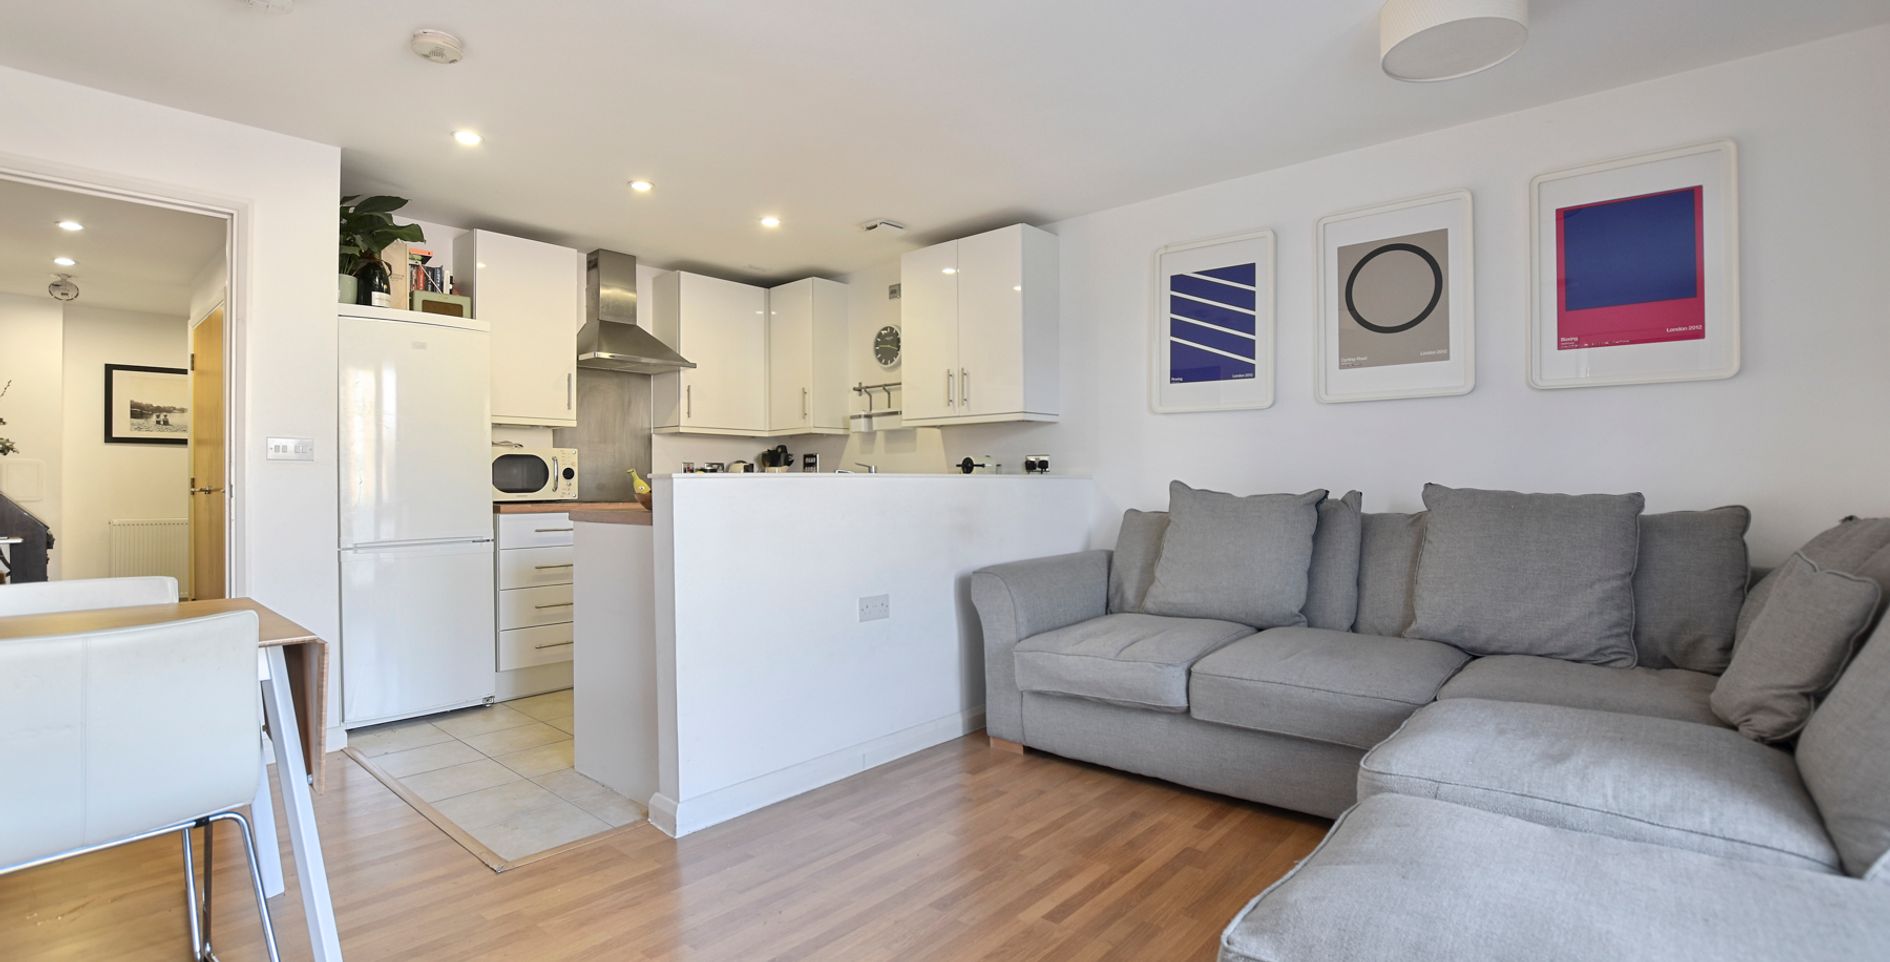 TW9 4NH – 2 bedroom apartment in Richmond upon Thames – Share to Buy